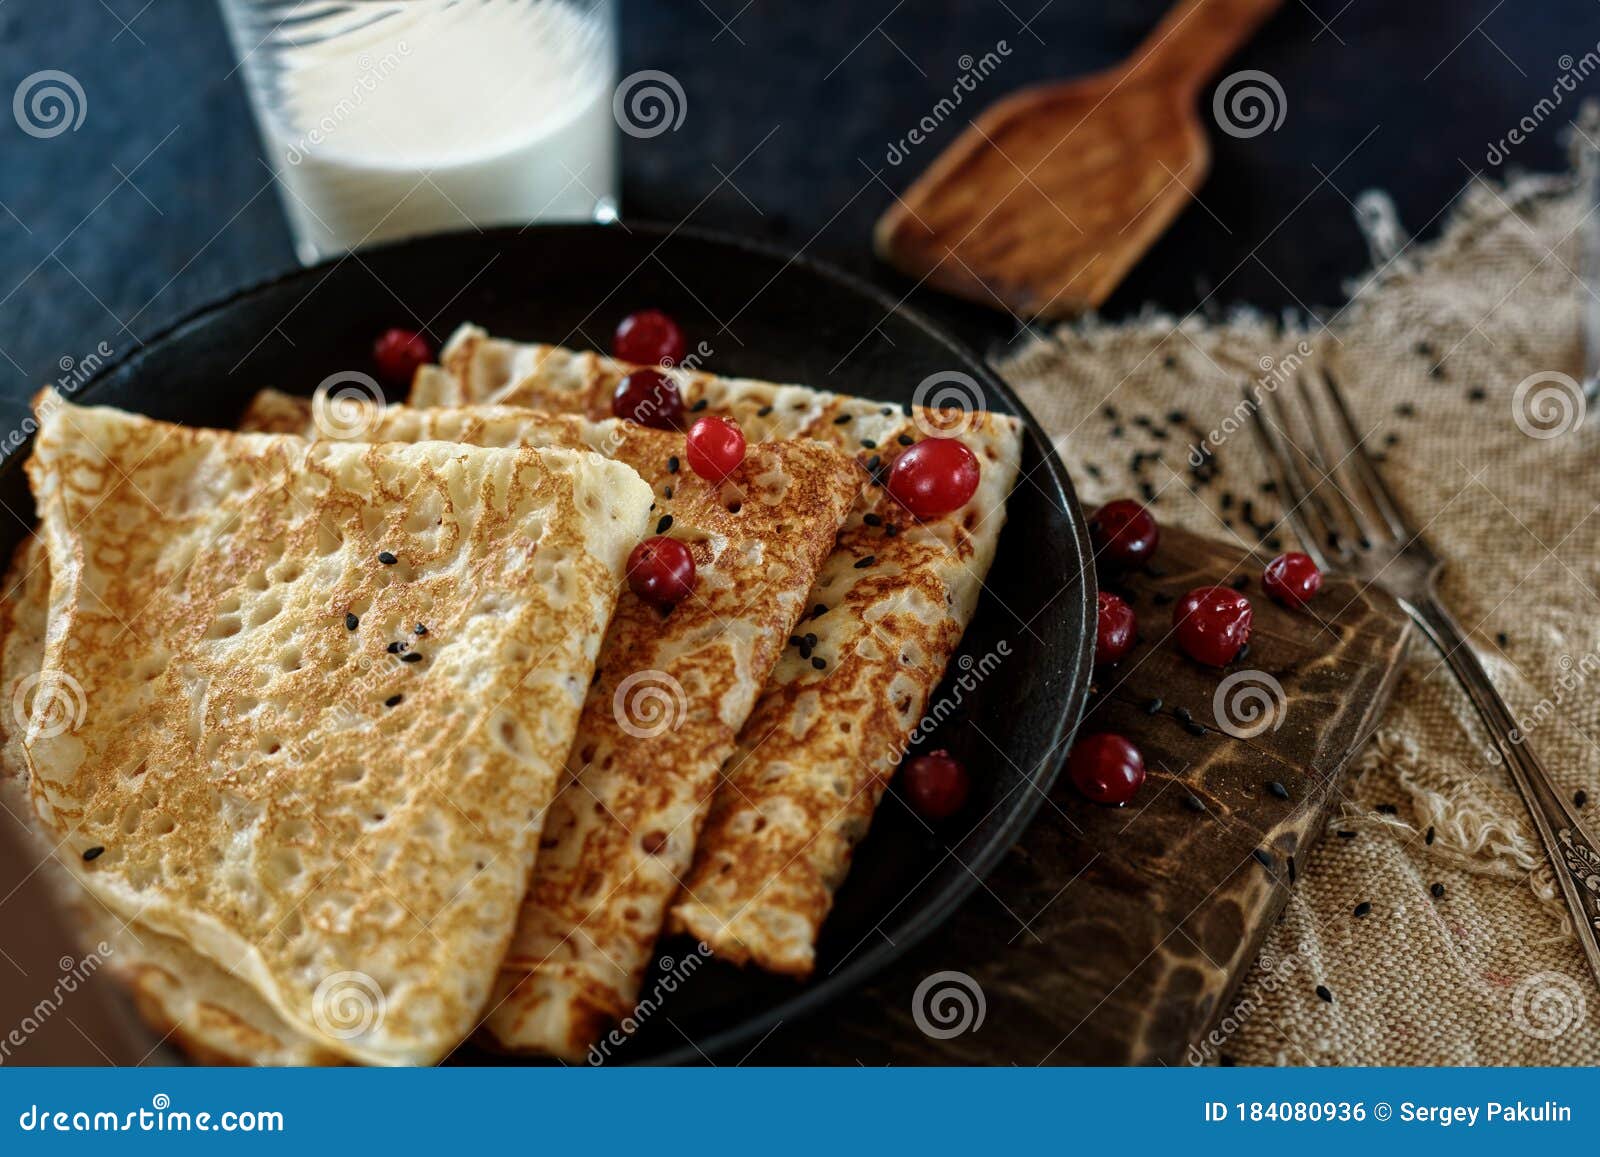 delicious home-cooked food. pancakes in a frying pan with cranberry berries and milk. rustic style